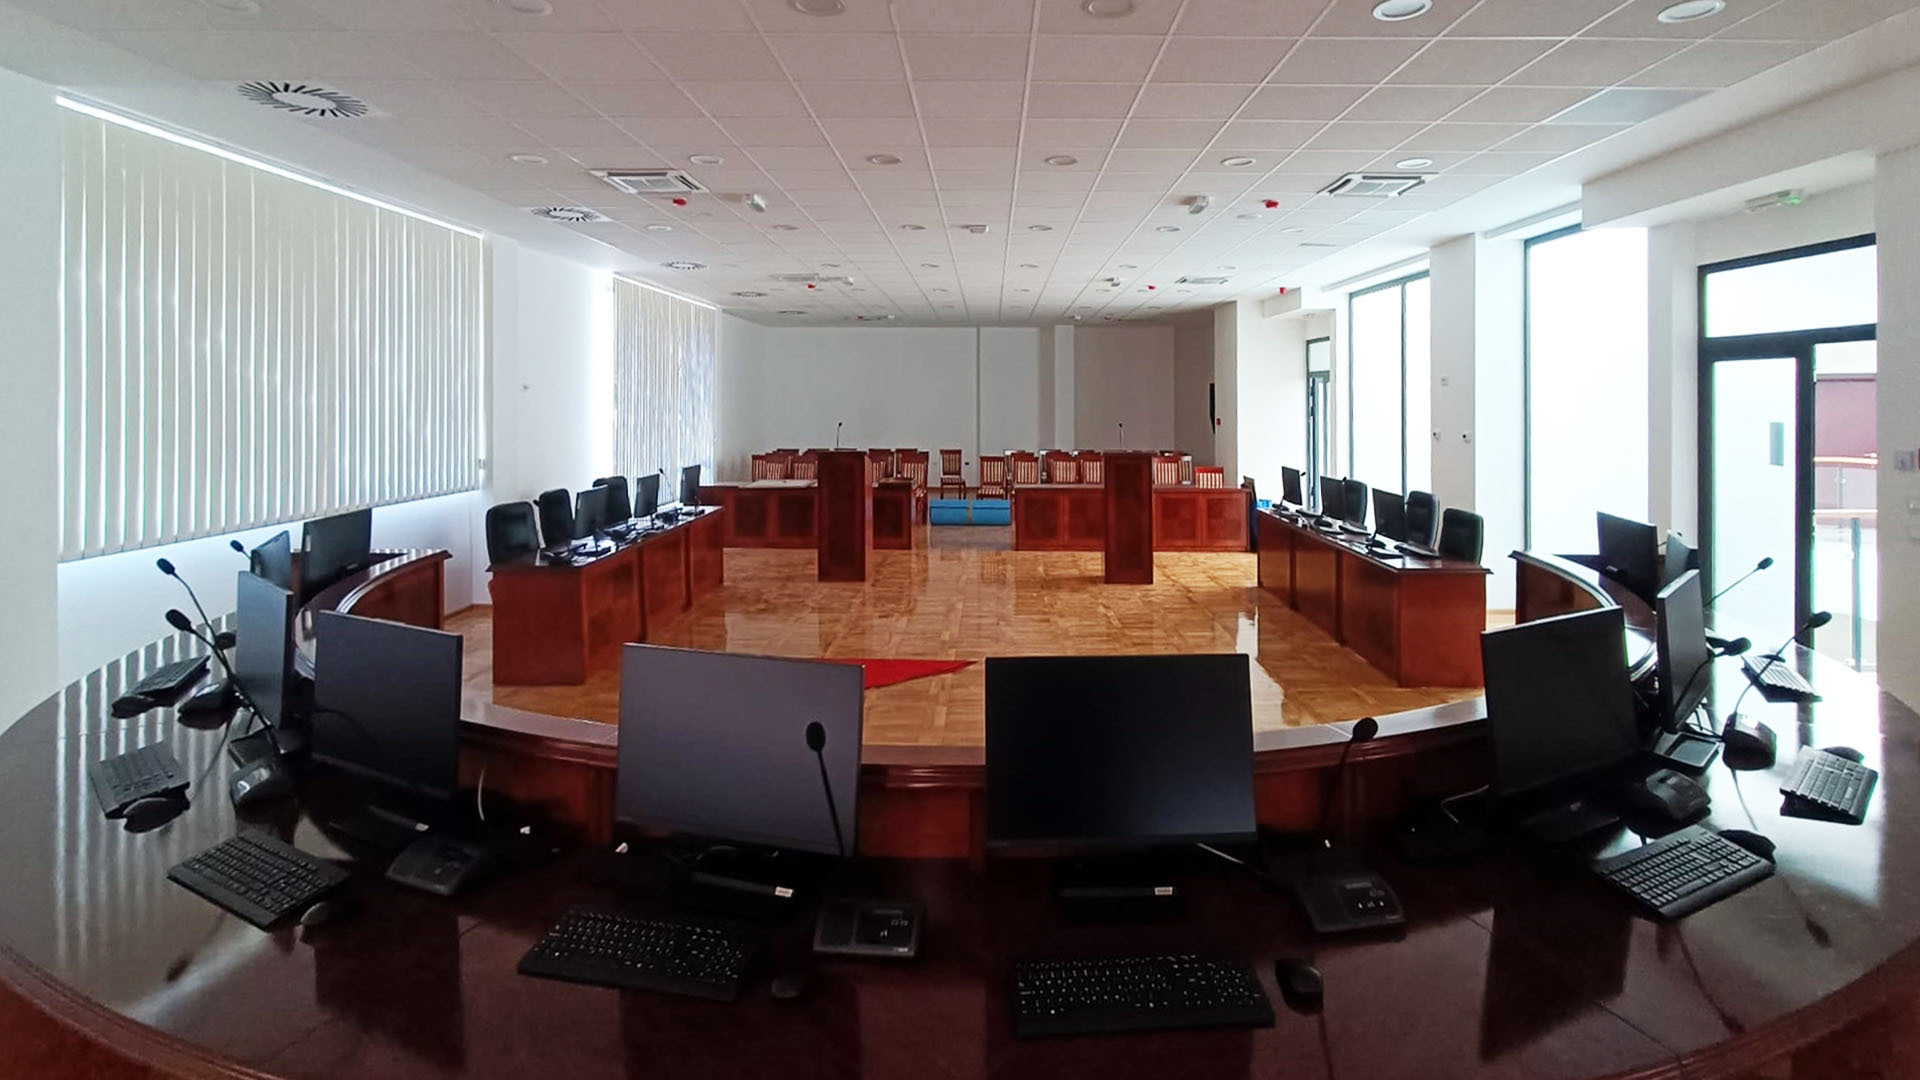 Aircom AW-Series Full Digital Wireless Conference System in the Court of Serbia